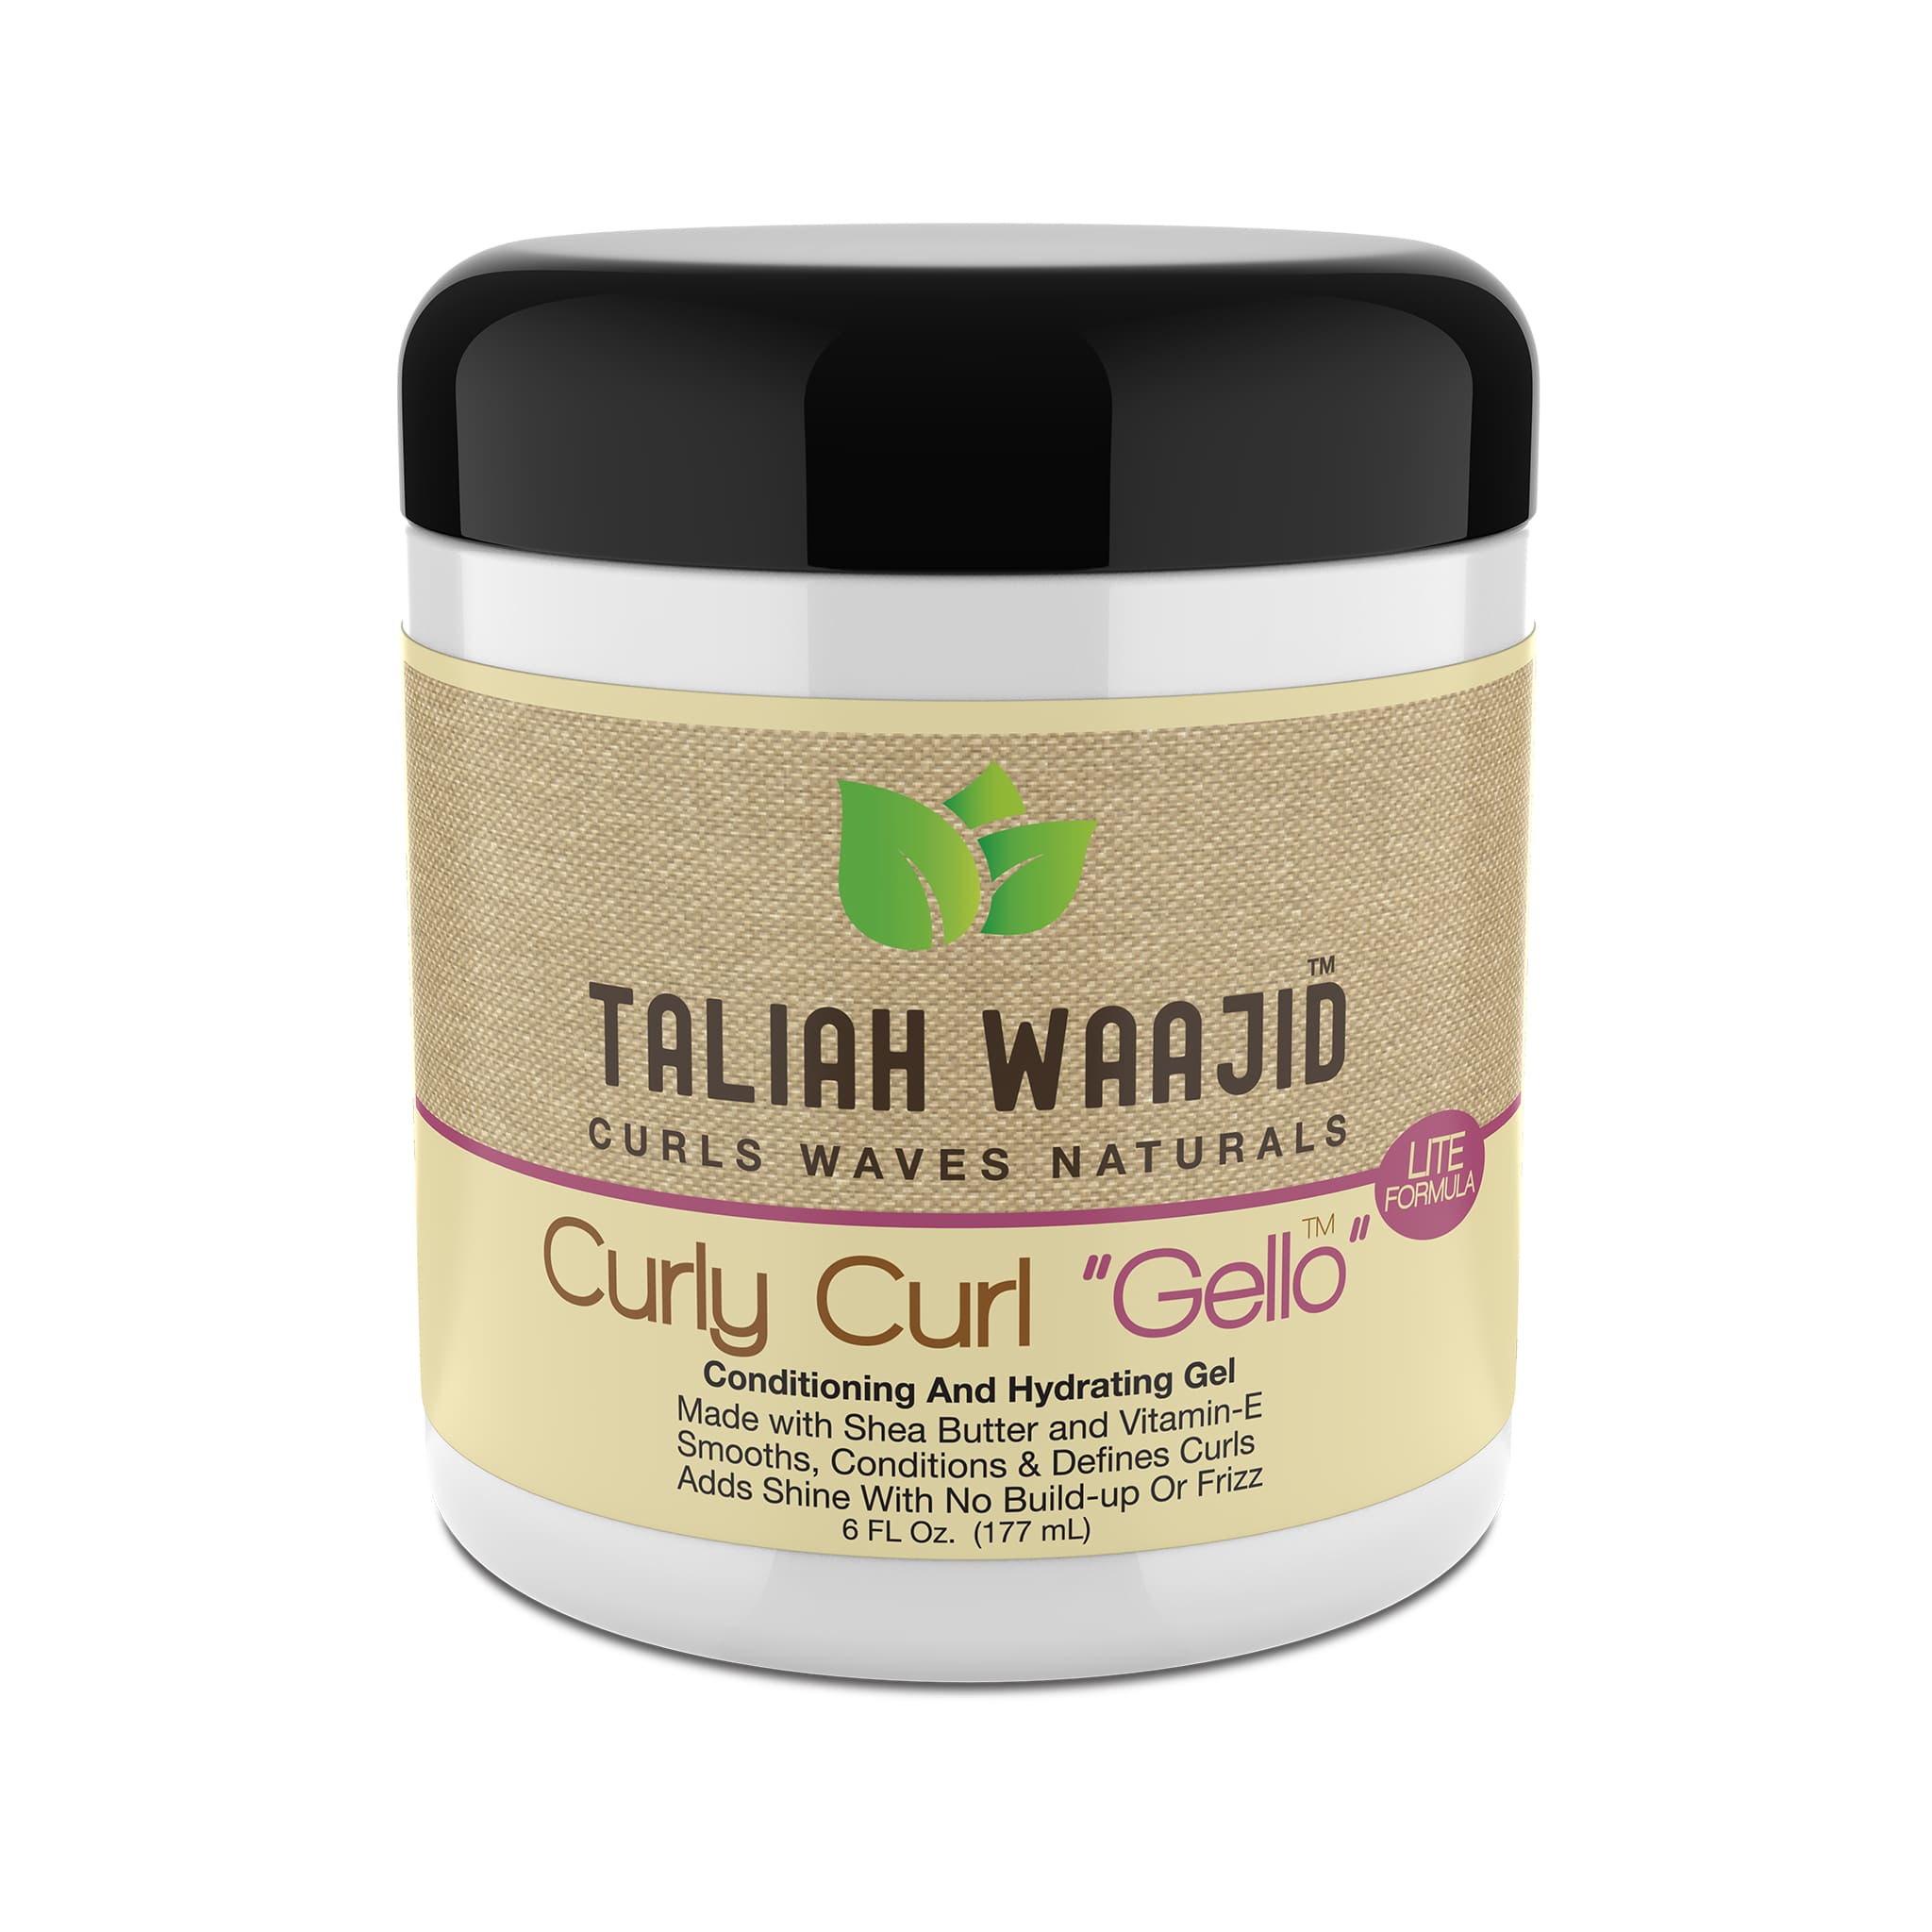 Taliah Waajid Curls Waves Natural Curly Curl “Gello” 6oz - Hydrating Gel That Stops Frizz and Adds Moisture To Your Hair - image 4 of 6